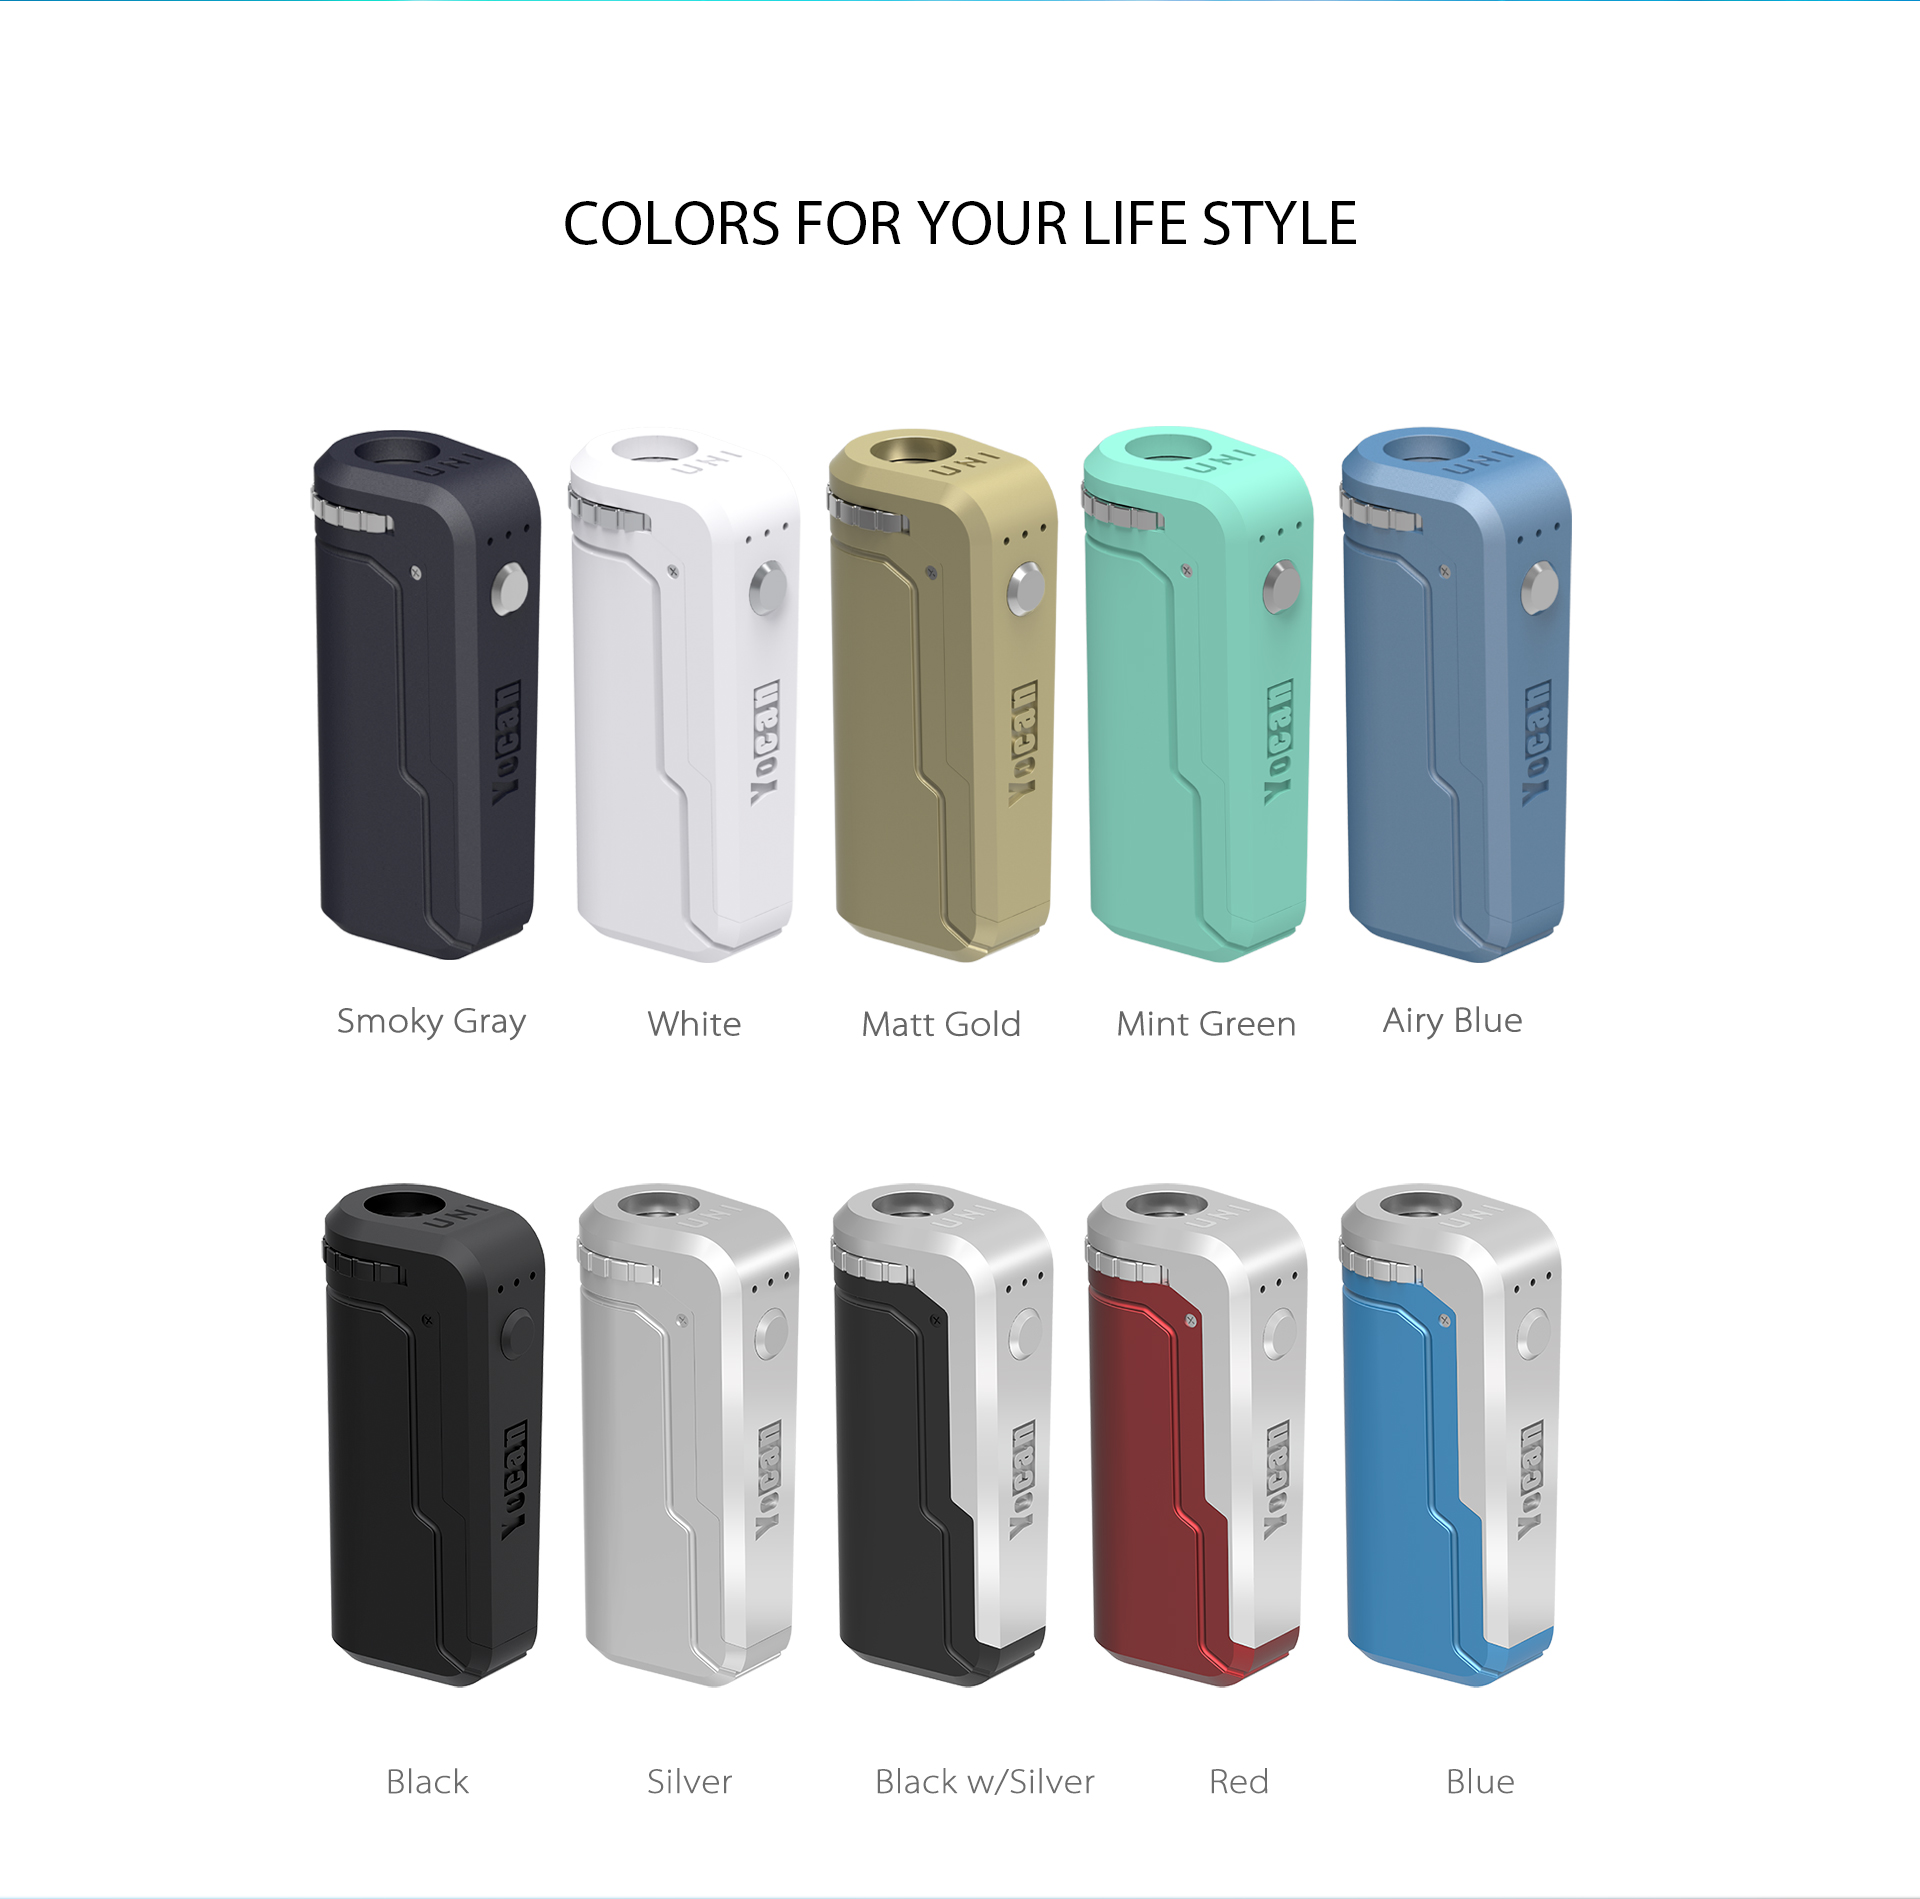 Yocan-UNI-box-mod-10-colors-for-your-life-style-2.jpg